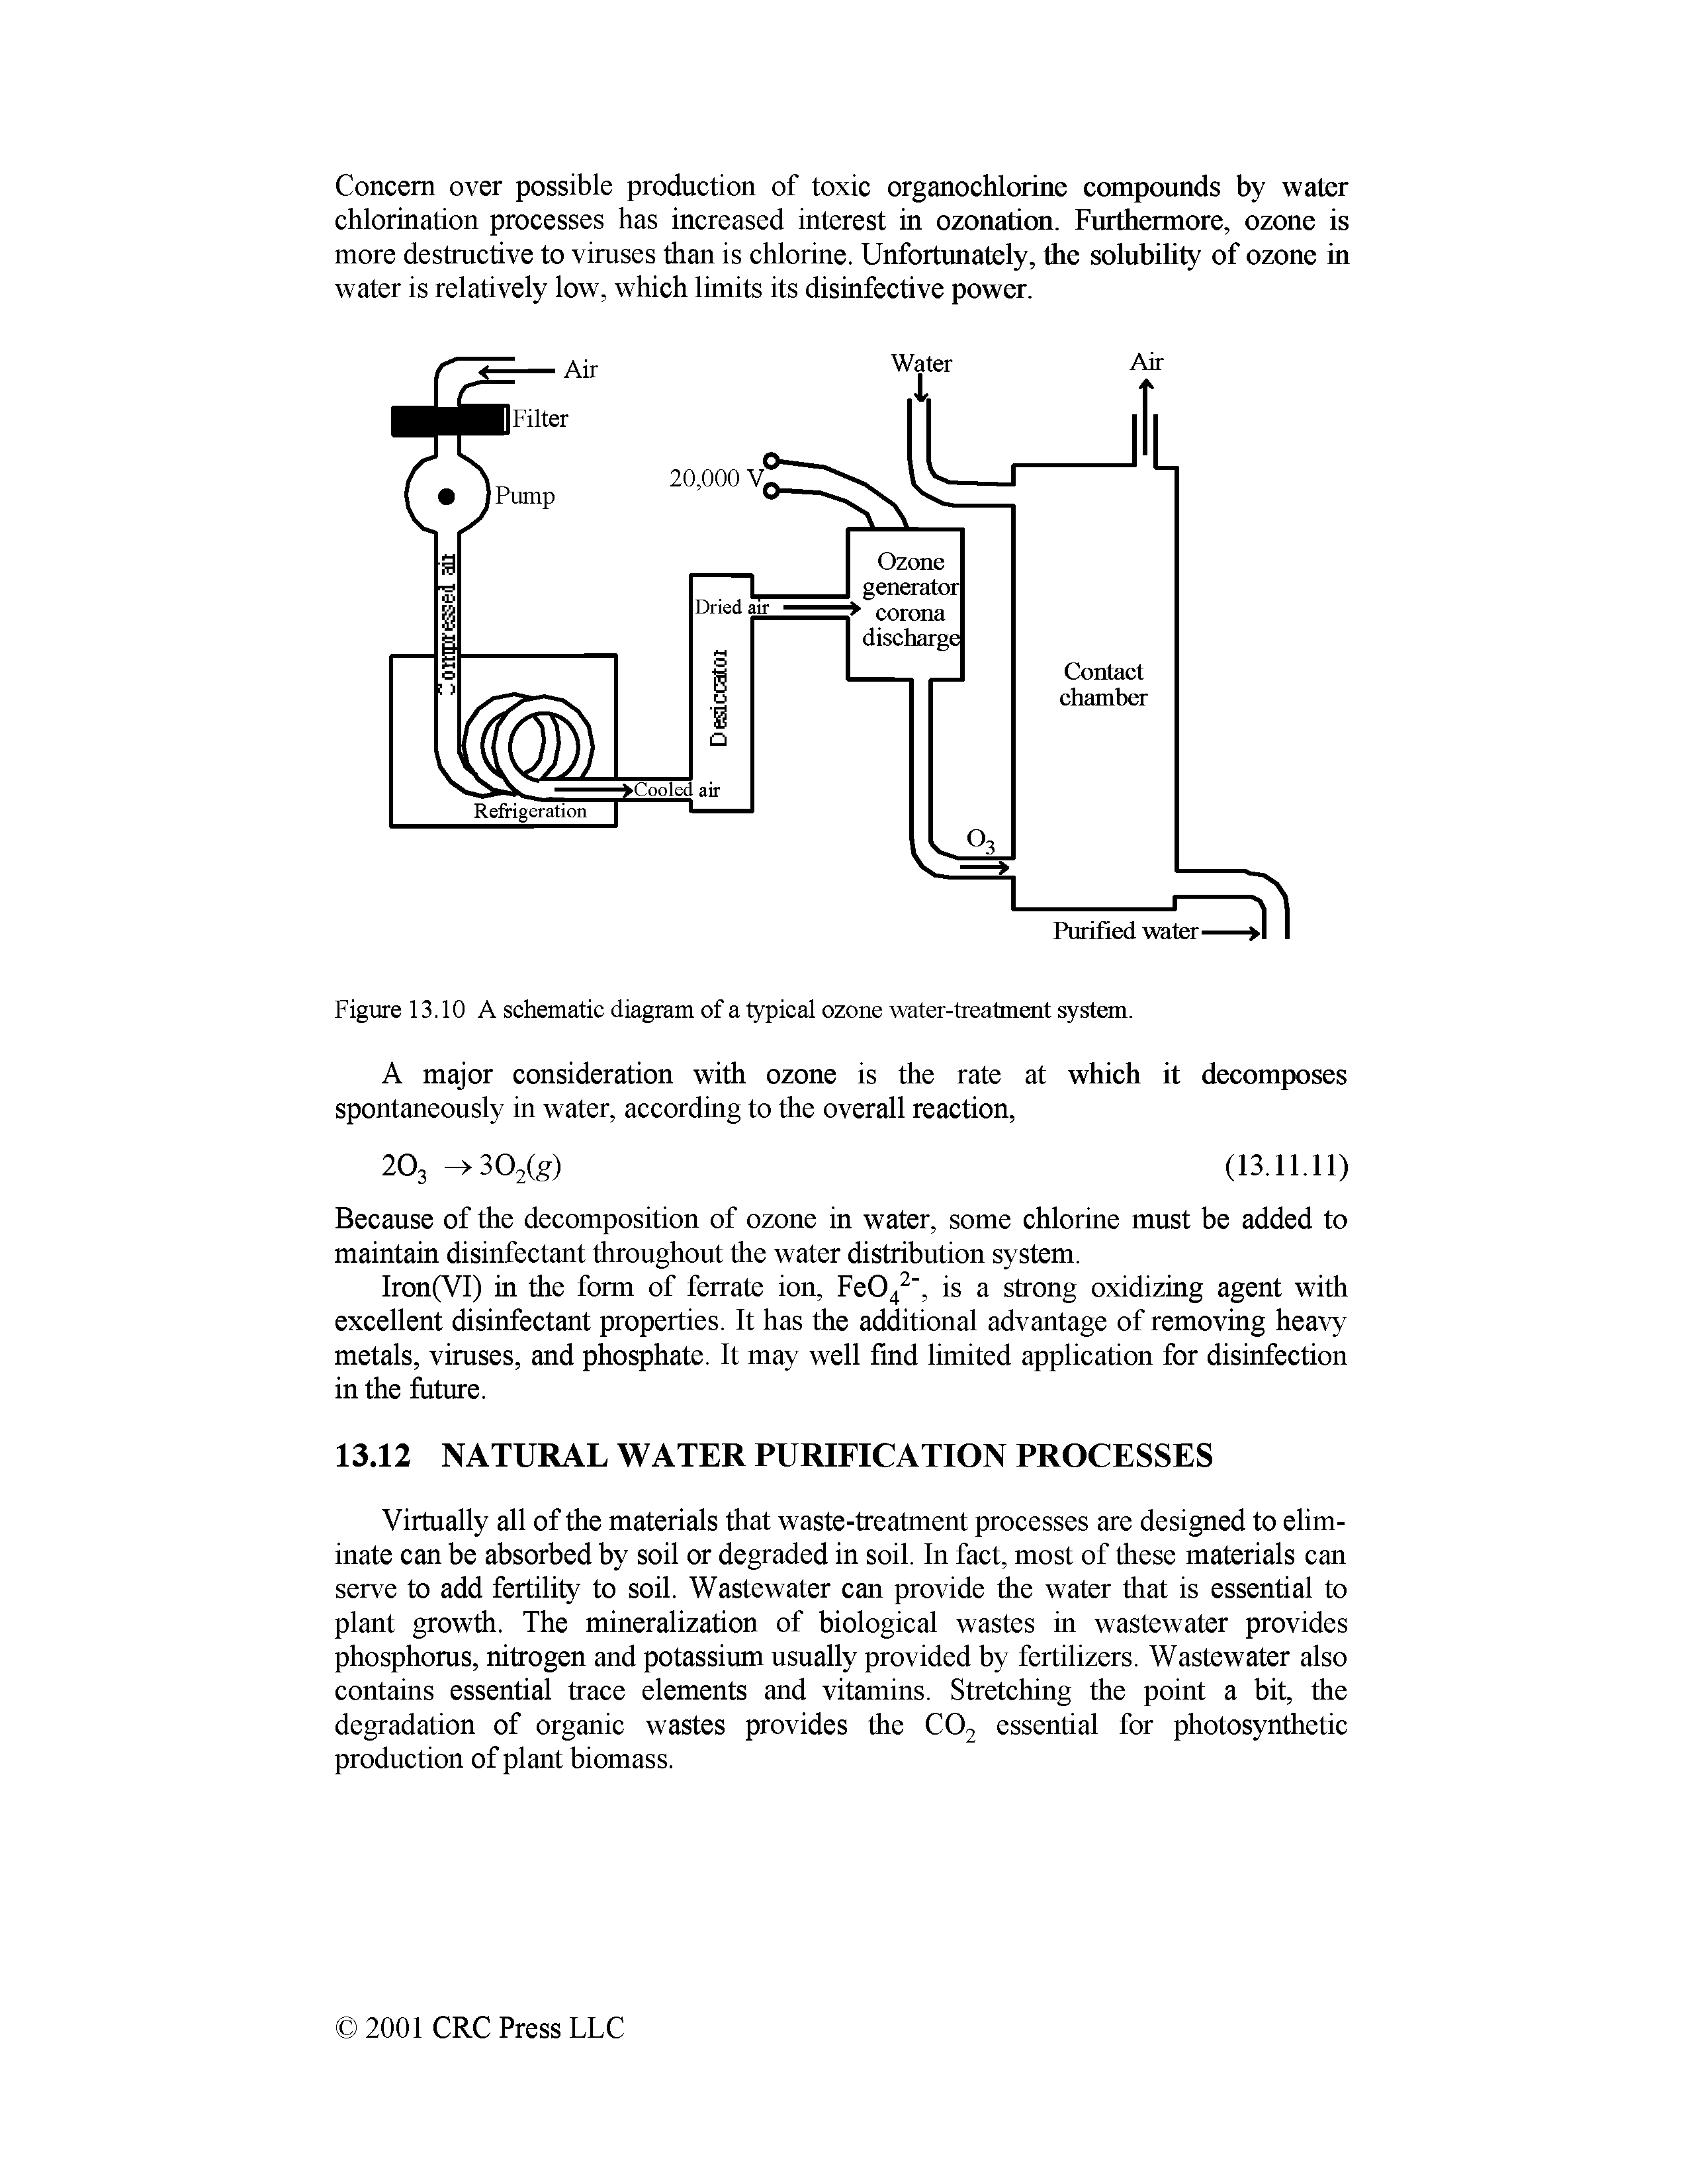 Figure 13.10 A schematic diagram of a typical ozone water-treatment system.